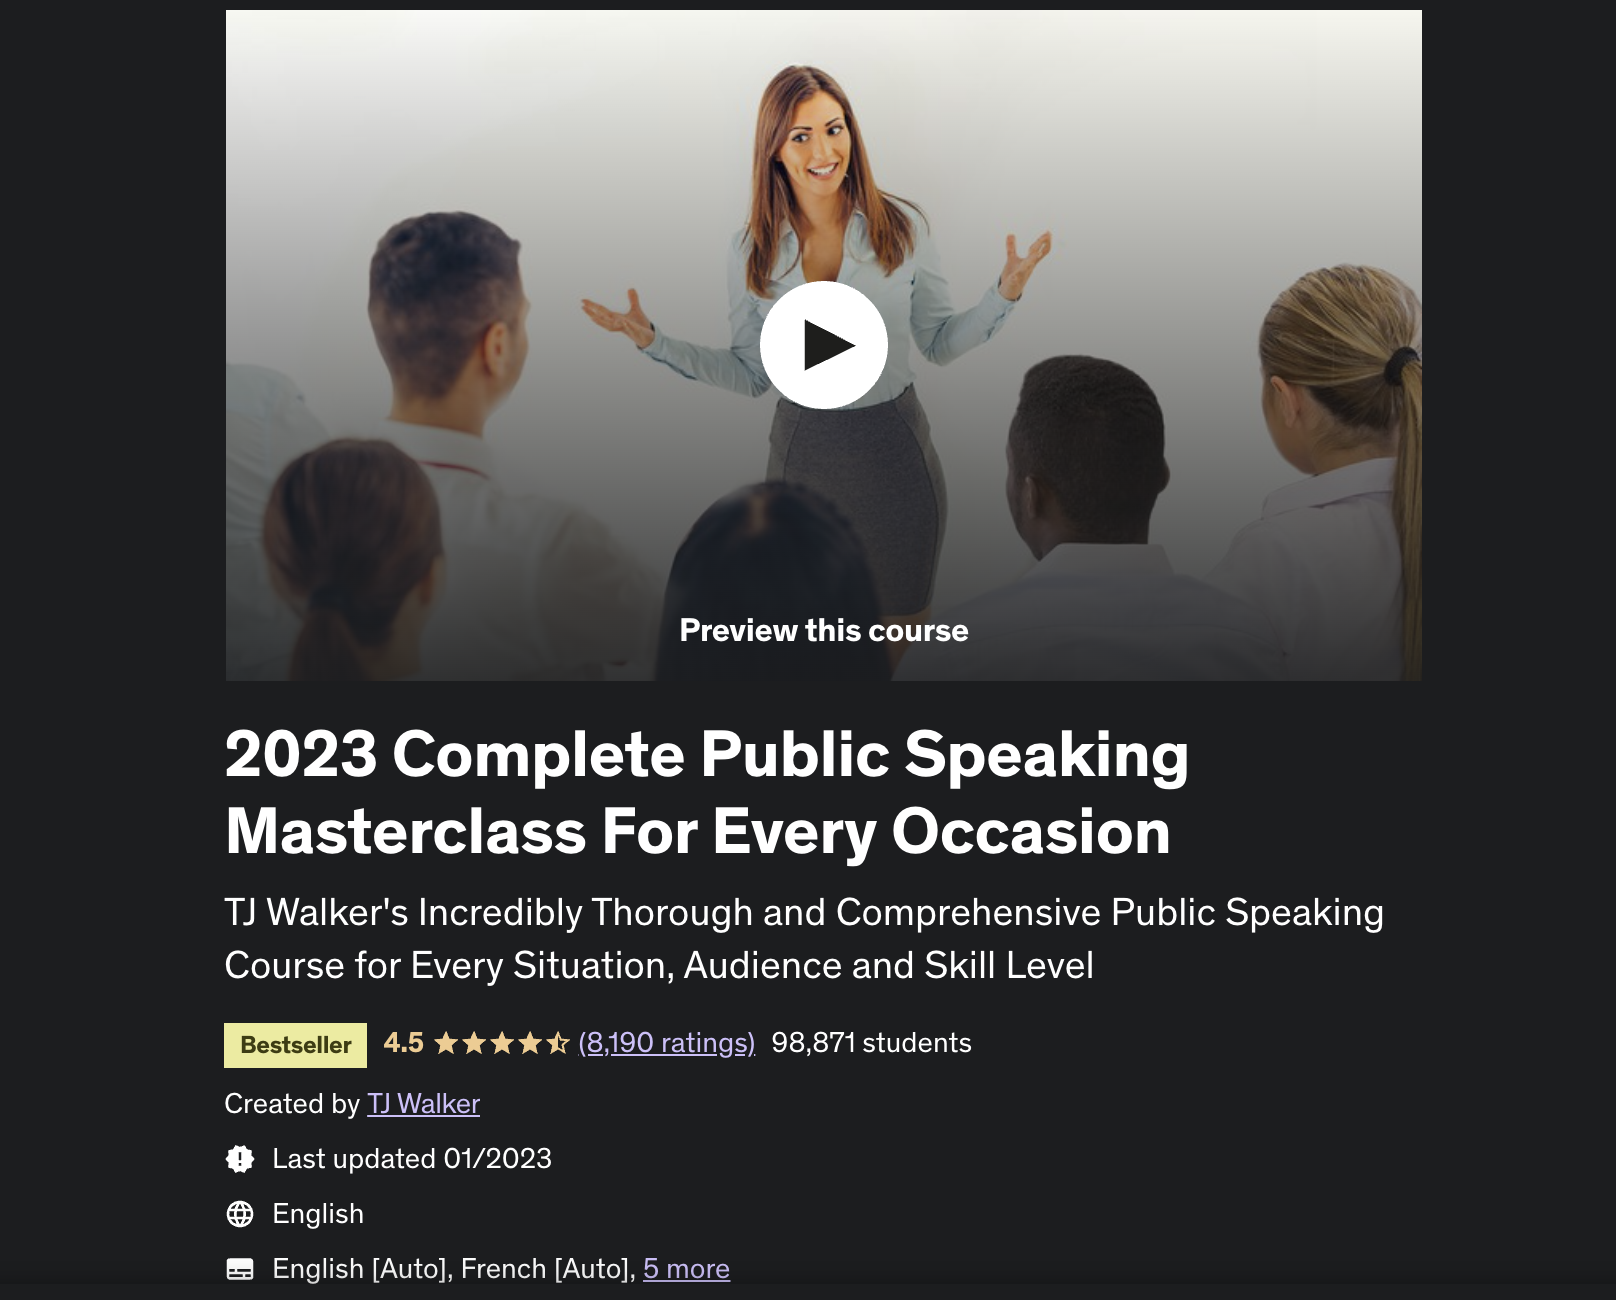 Complete Public Speaking Masterclass for Any Occasion